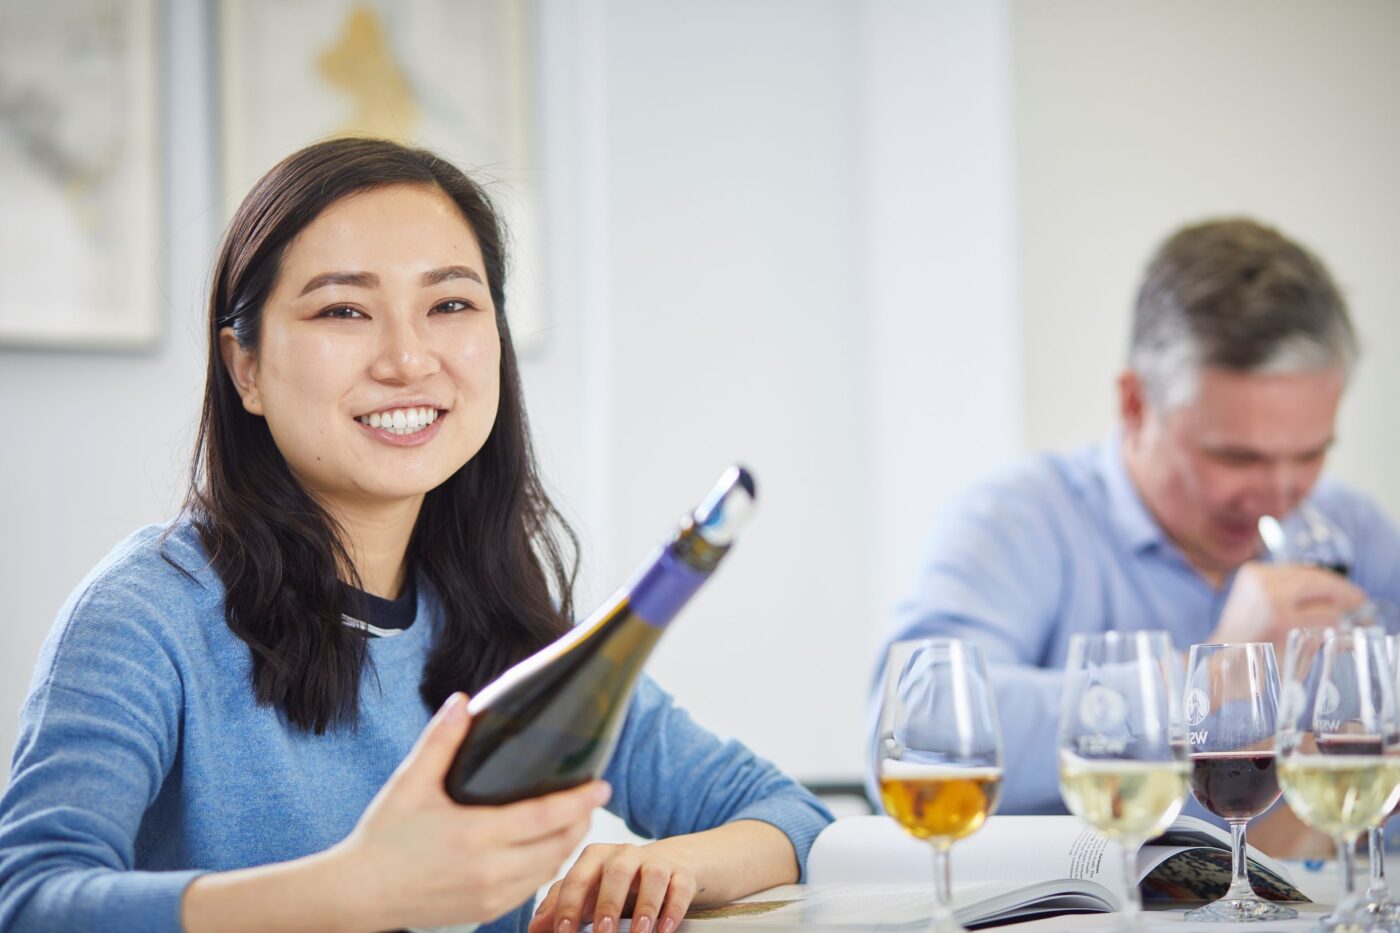 Woman smiling in the calendar while holding up a bottle of wine. Man in background with a wine glass at his nose.